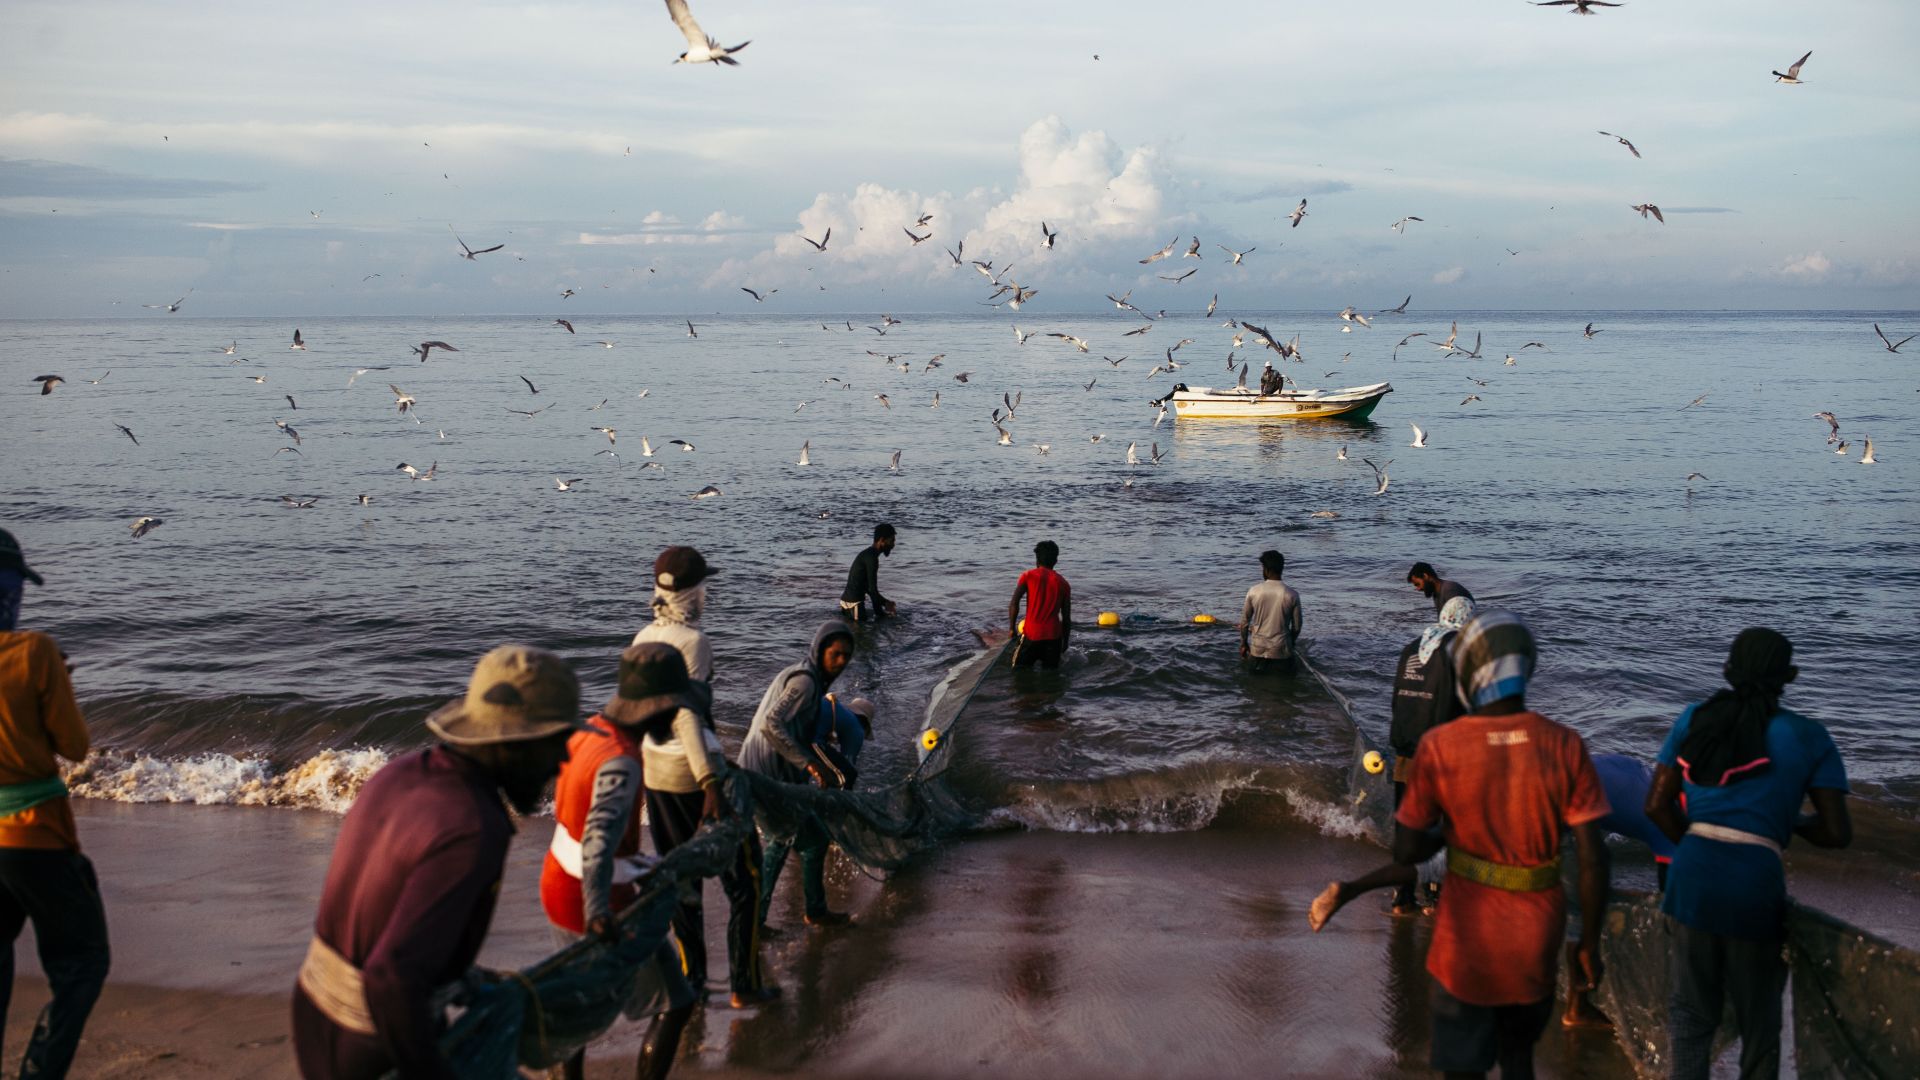 A traditional, fully beach seine group in Kalpitiya hauls in a large school of anchovies